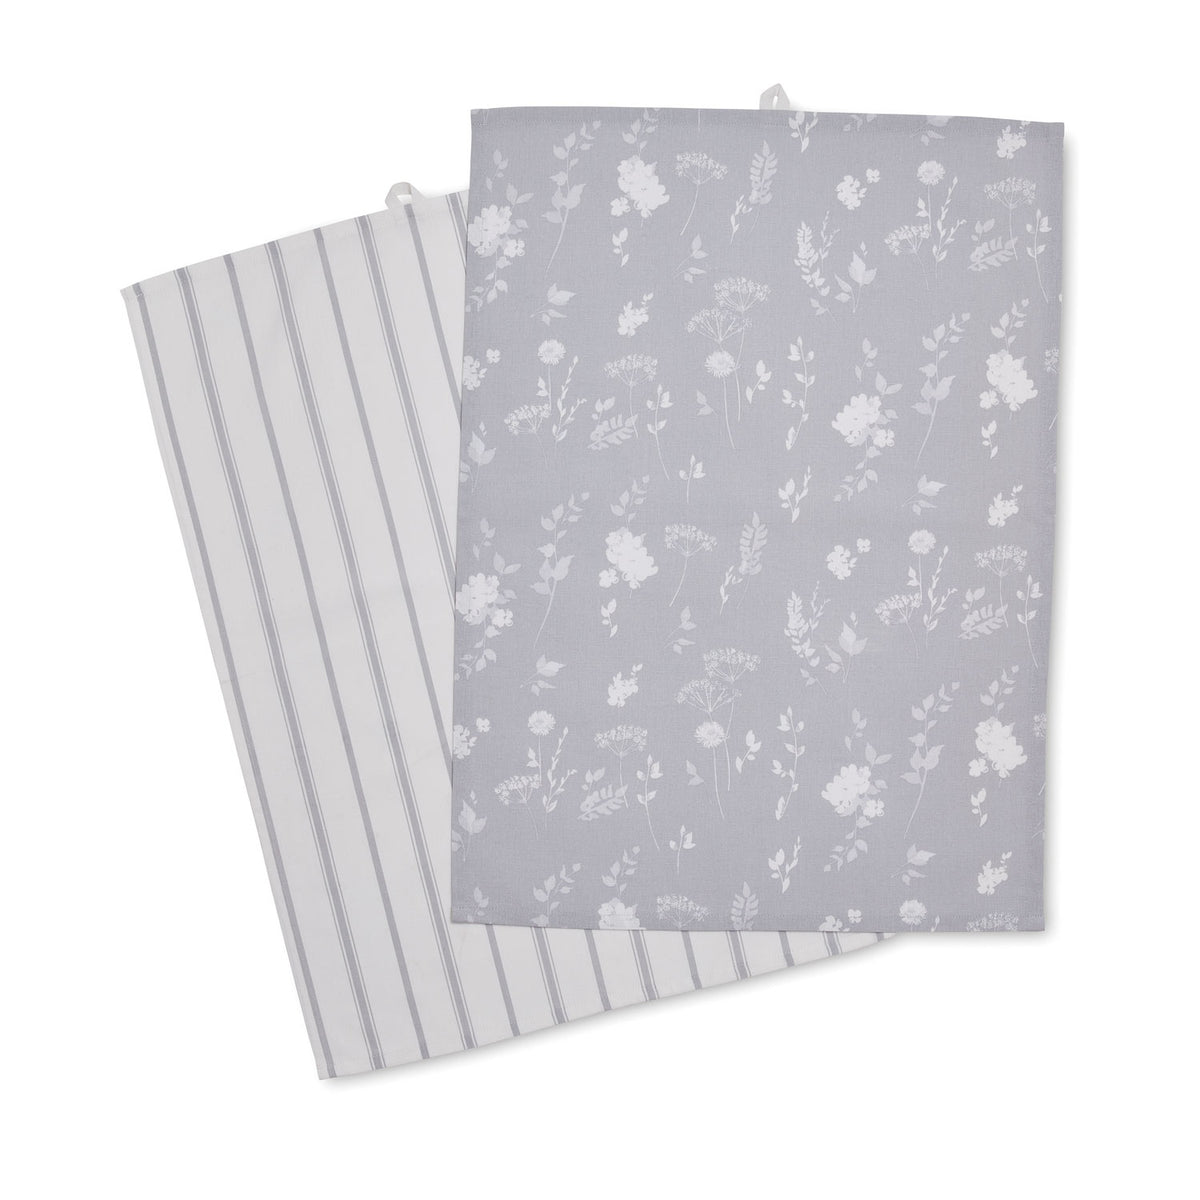 Dining Meadowsweet Floral Tea Towels Pair - White / Grey